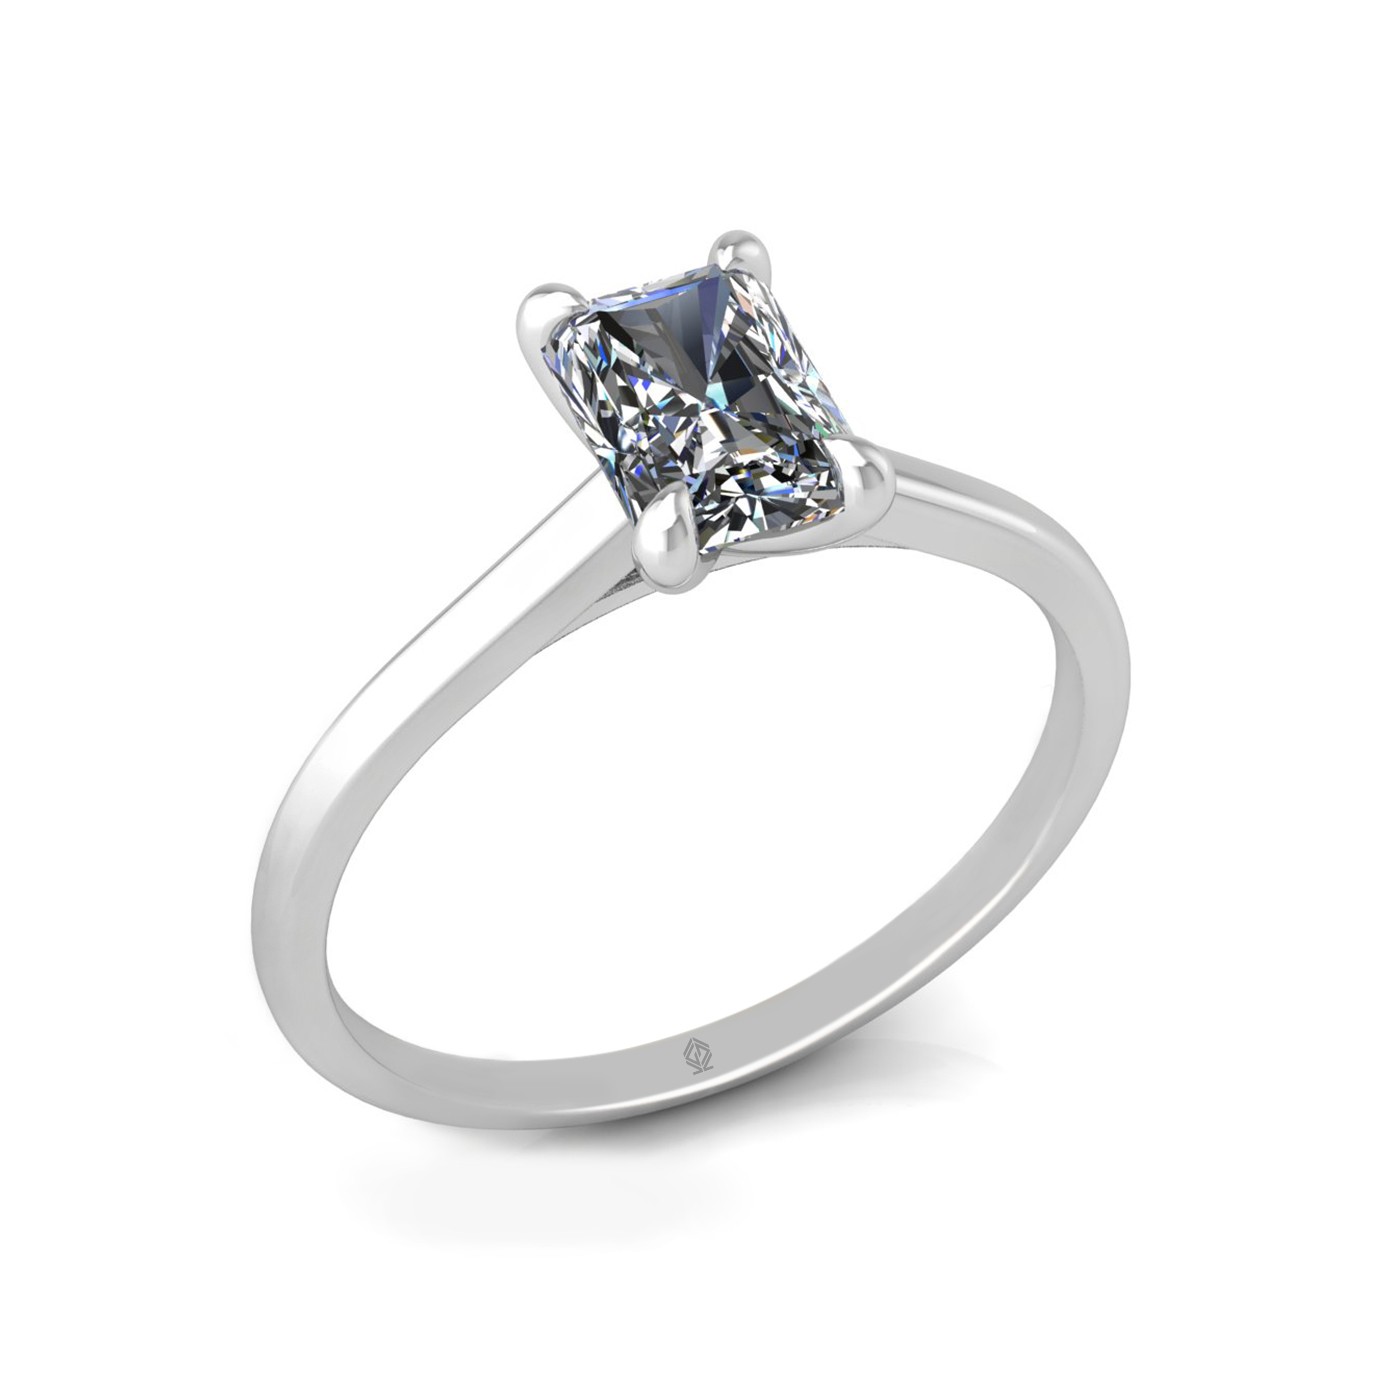 18k white gold  1,00 ct 4 prongs solitaire radiant cut diamond engagement ring with whisper thin band